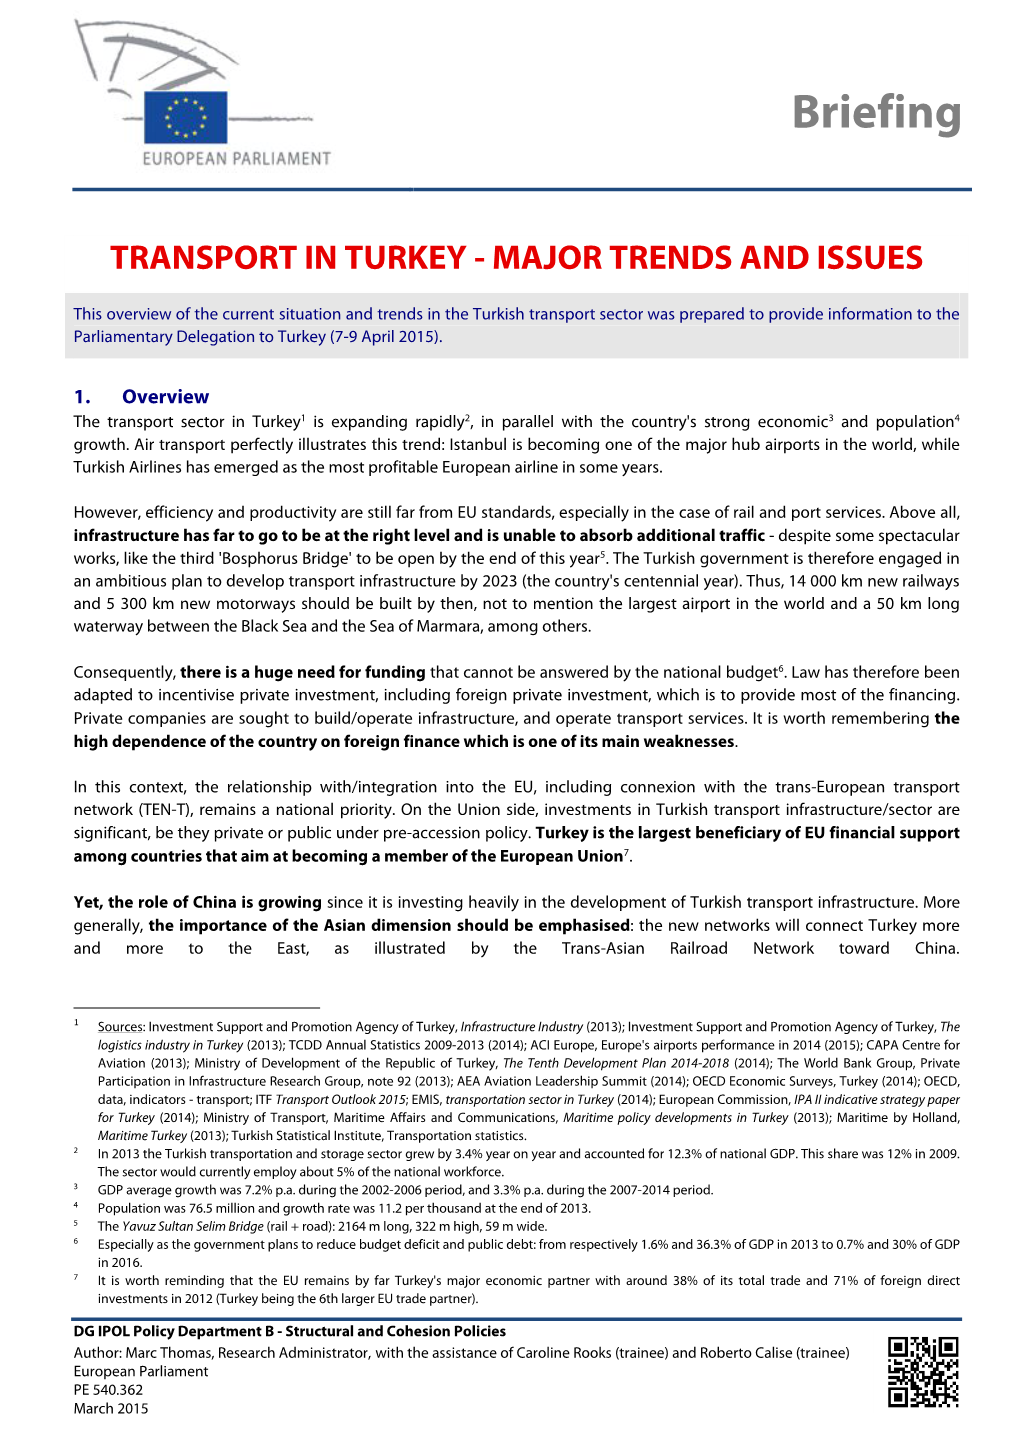 Transport in Turkey - Major Trends and Issues